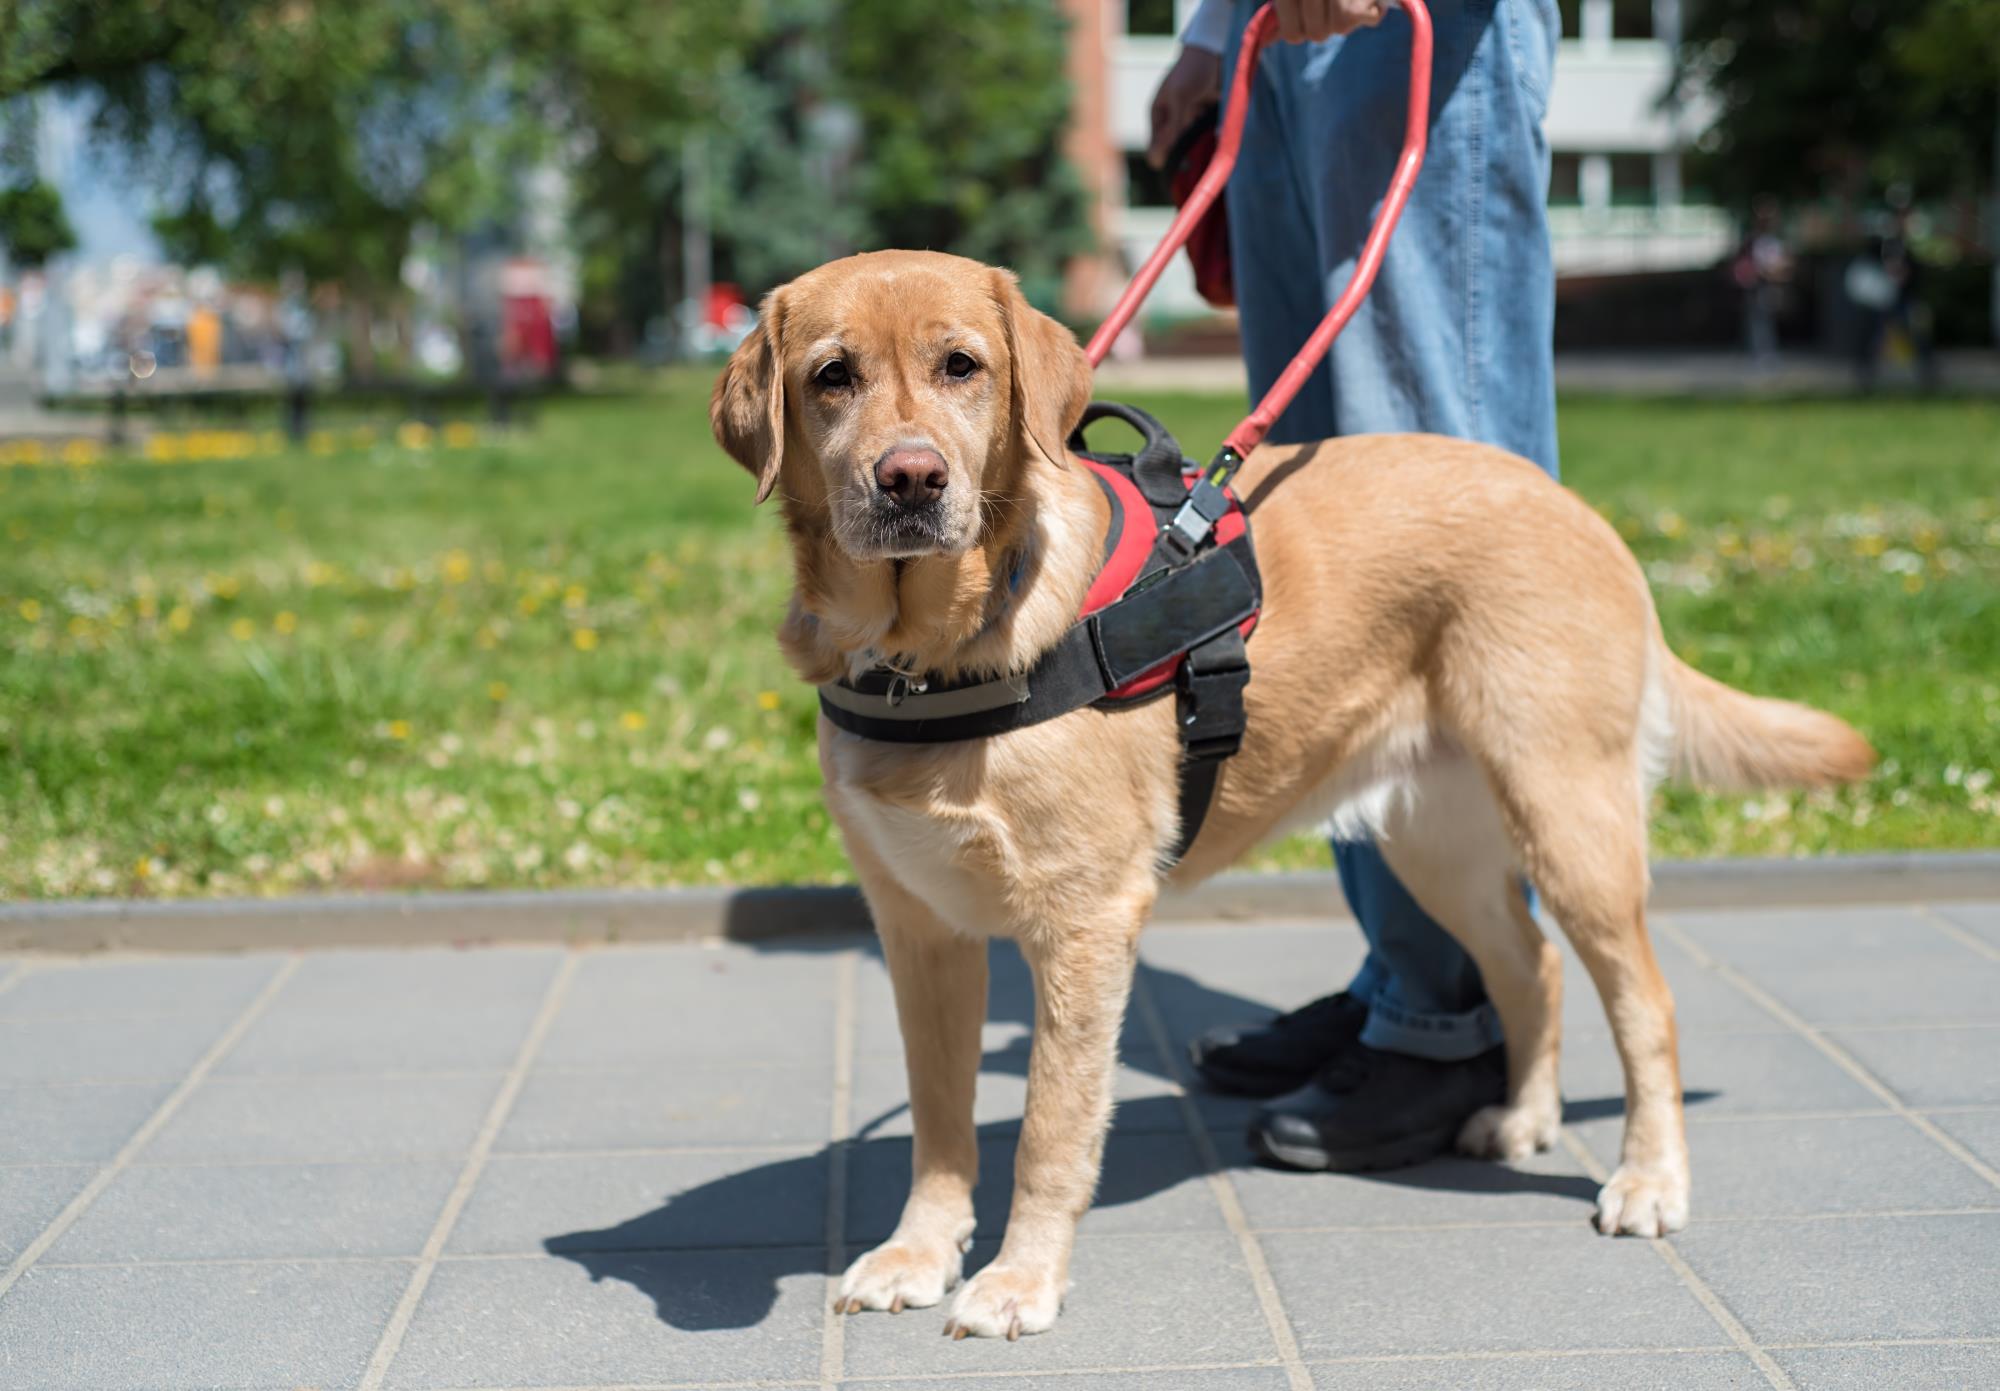 Dog with harness being walked